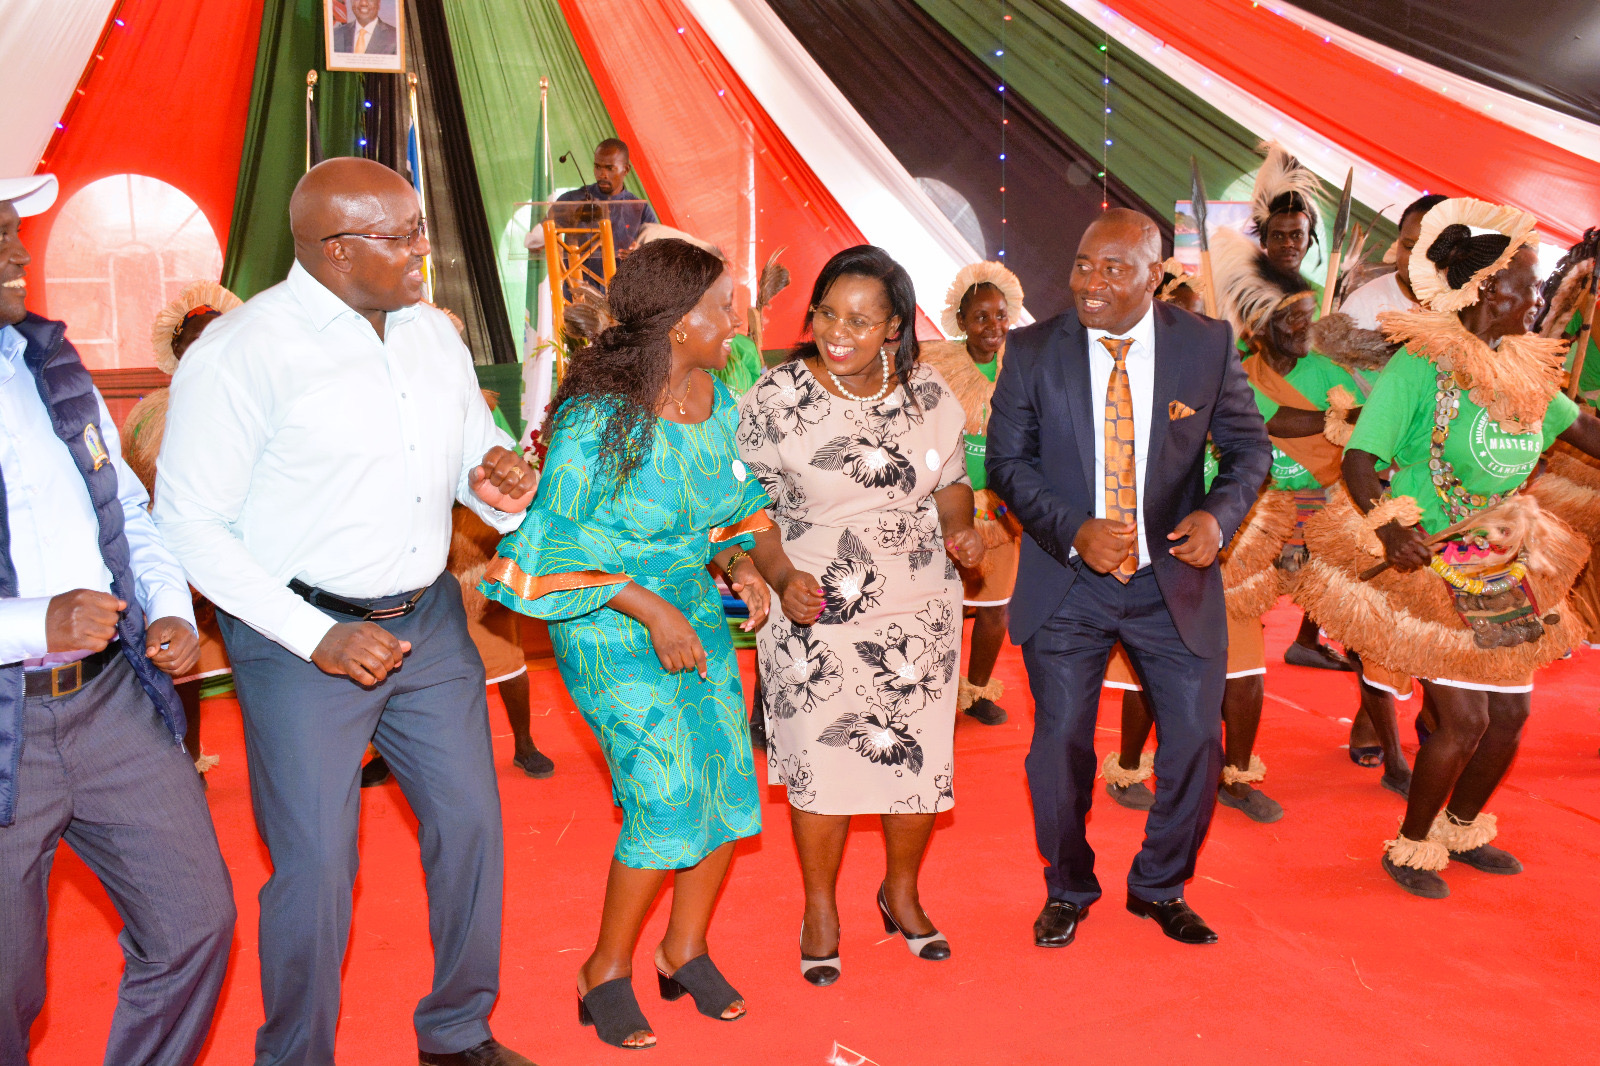 he Cabinet Secretary, Hon. Peninah Malonza (4th from left), is joined by the Governor of Embu County, Her Excellency Cecily Mbarire (3rd from left), and the Principal Secretary State Department for Tourism, Hon. John Ololtuaa, in a cultural dance during the World Tourism Day celebrations.